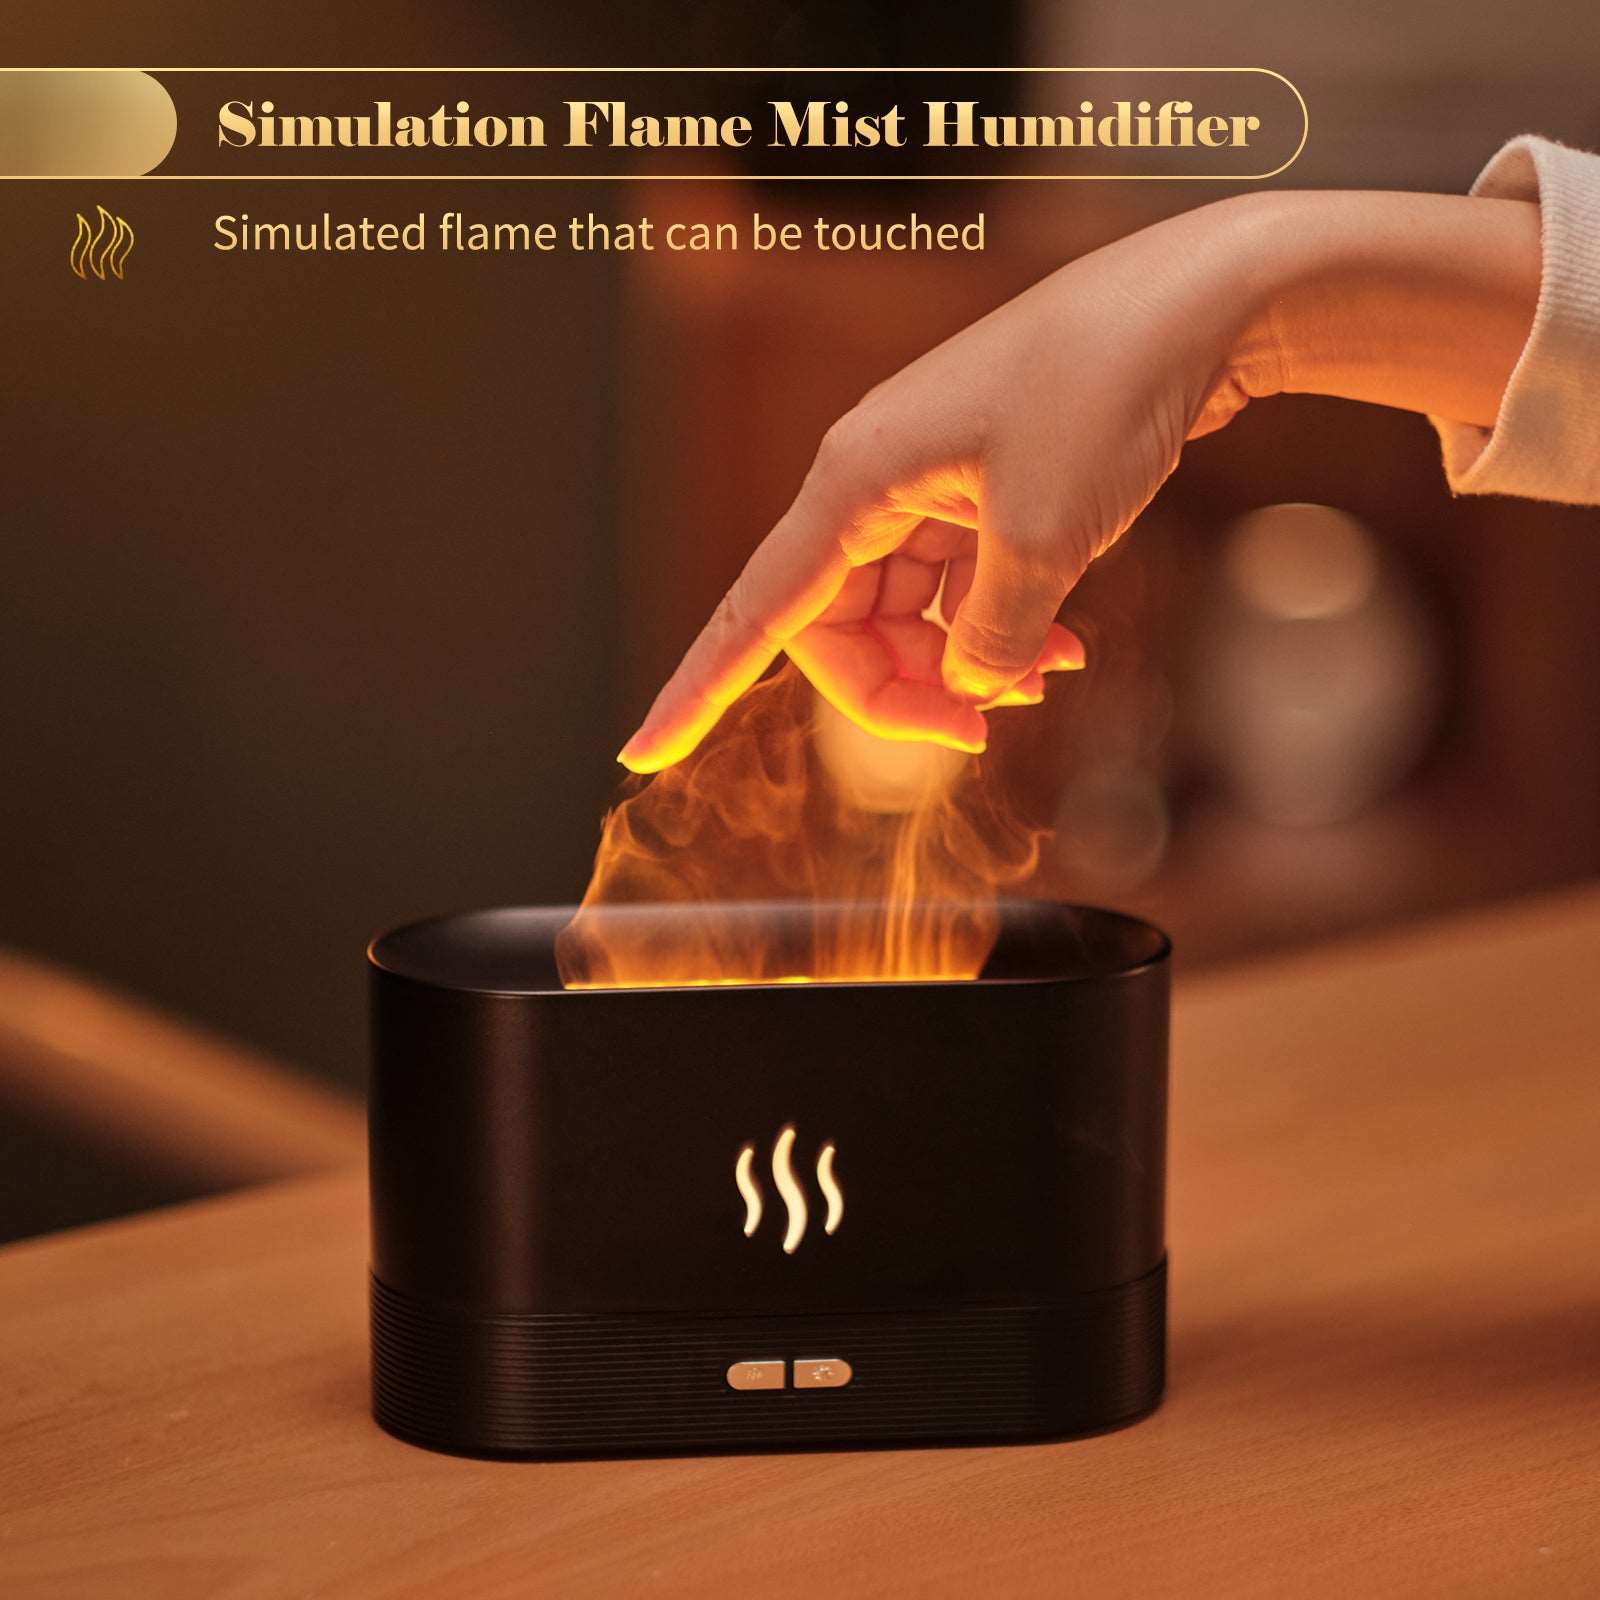 Aroma Diffuser with Flame Light | Mist Humidifier for Aromatherapy | Waterless Auto-Off Protection | Spa, Home, Yoga, Office